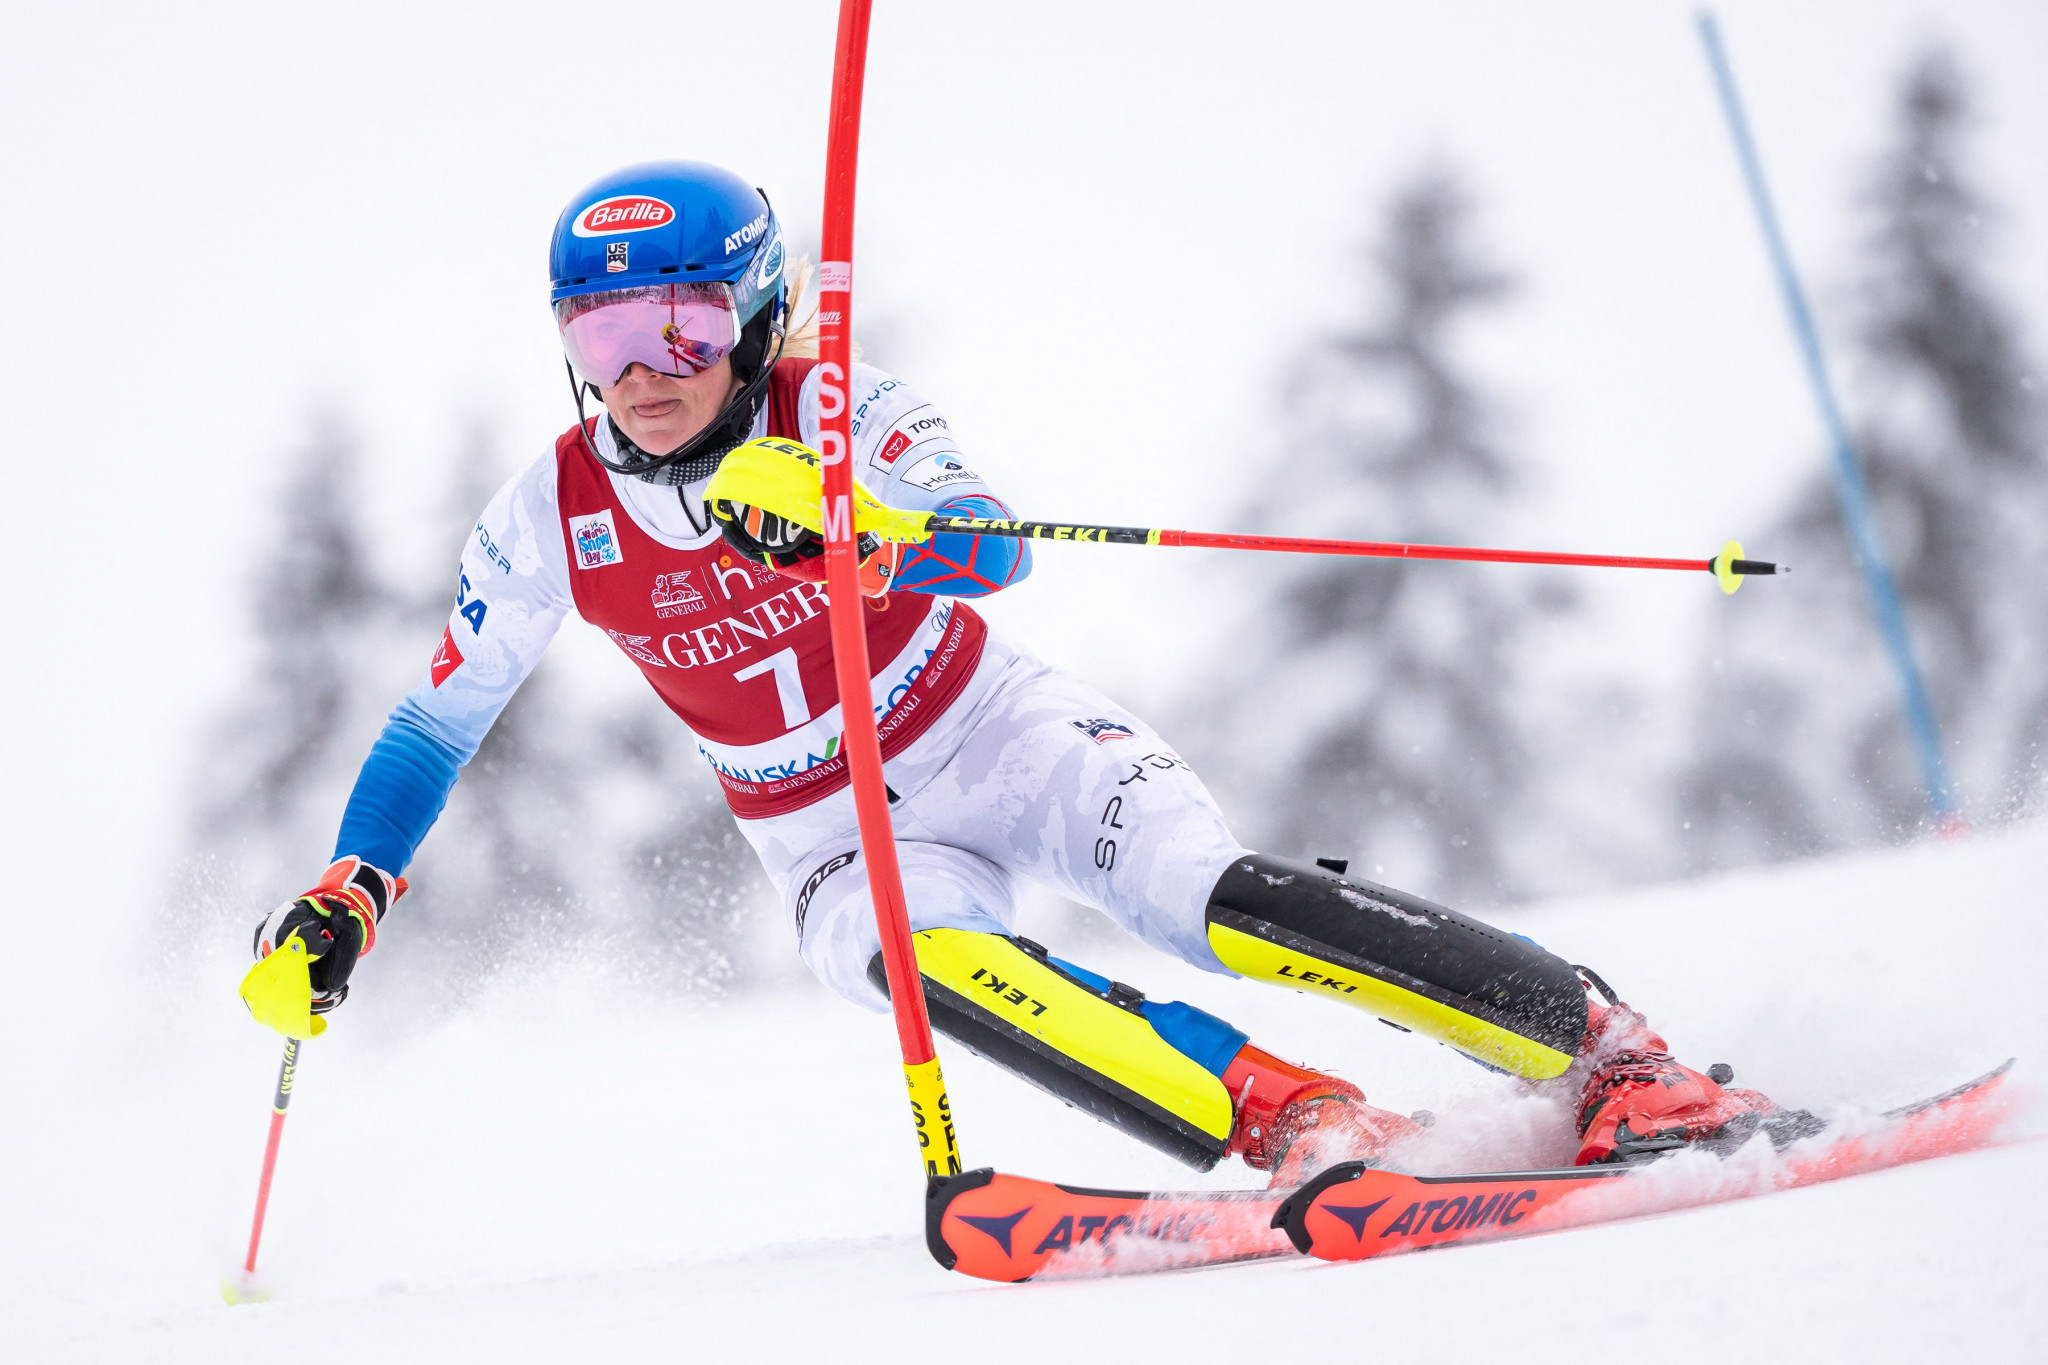 Shiffrin bids for record-breaking 47th slalom victory at Schladming Alpine Ski World Cup